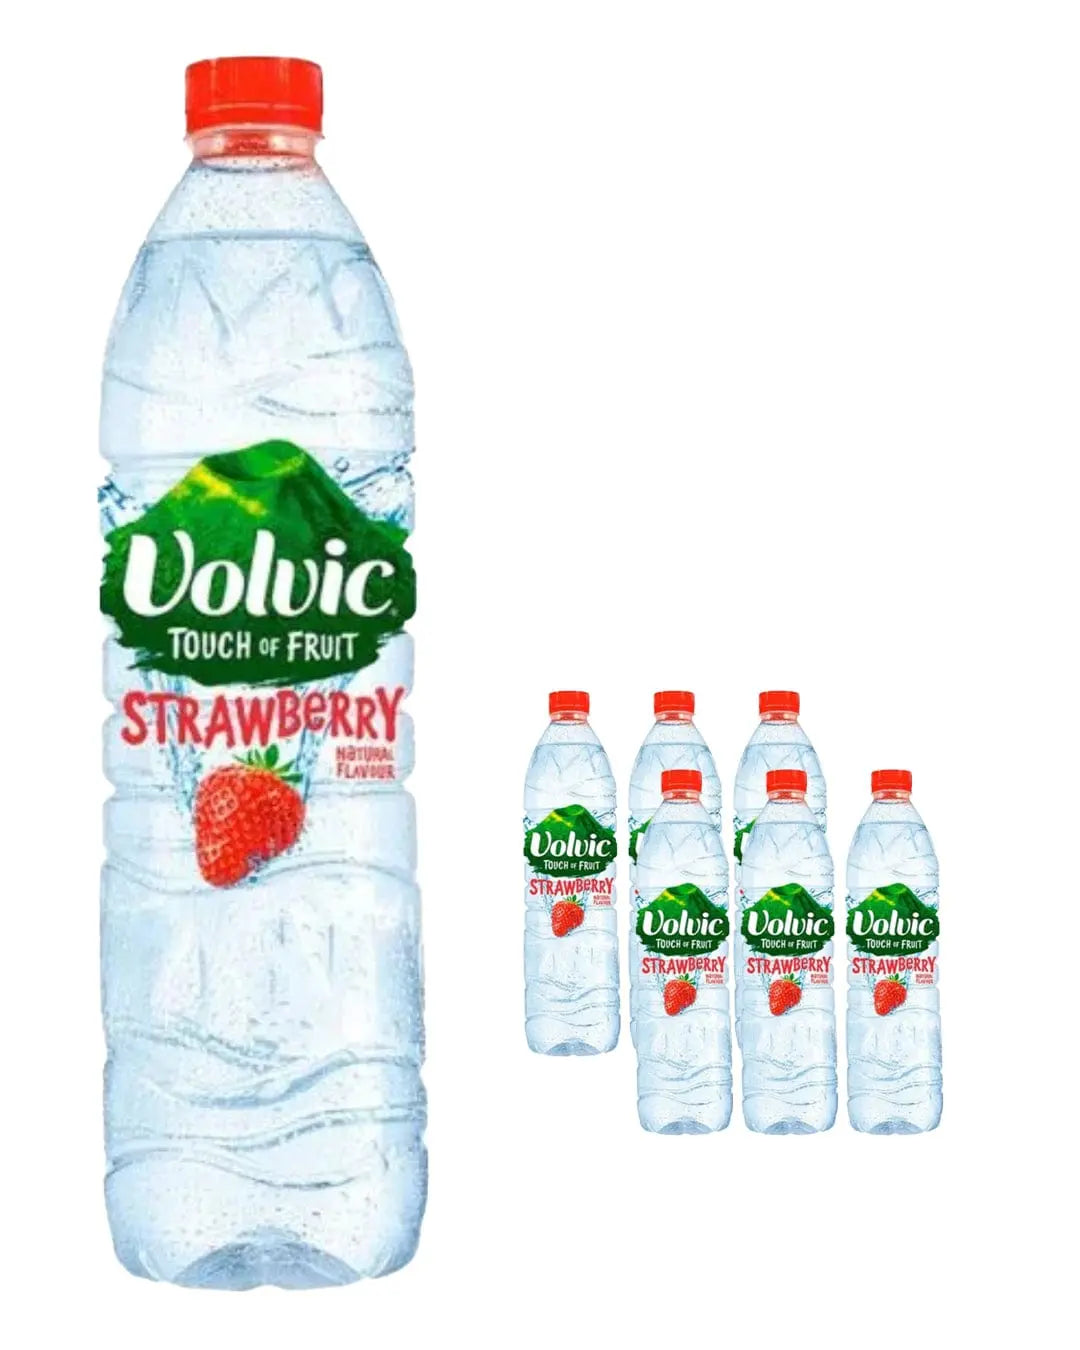 Volvic Touch of Fruit Strawberry Multipack, 6 x 1.5 L Water